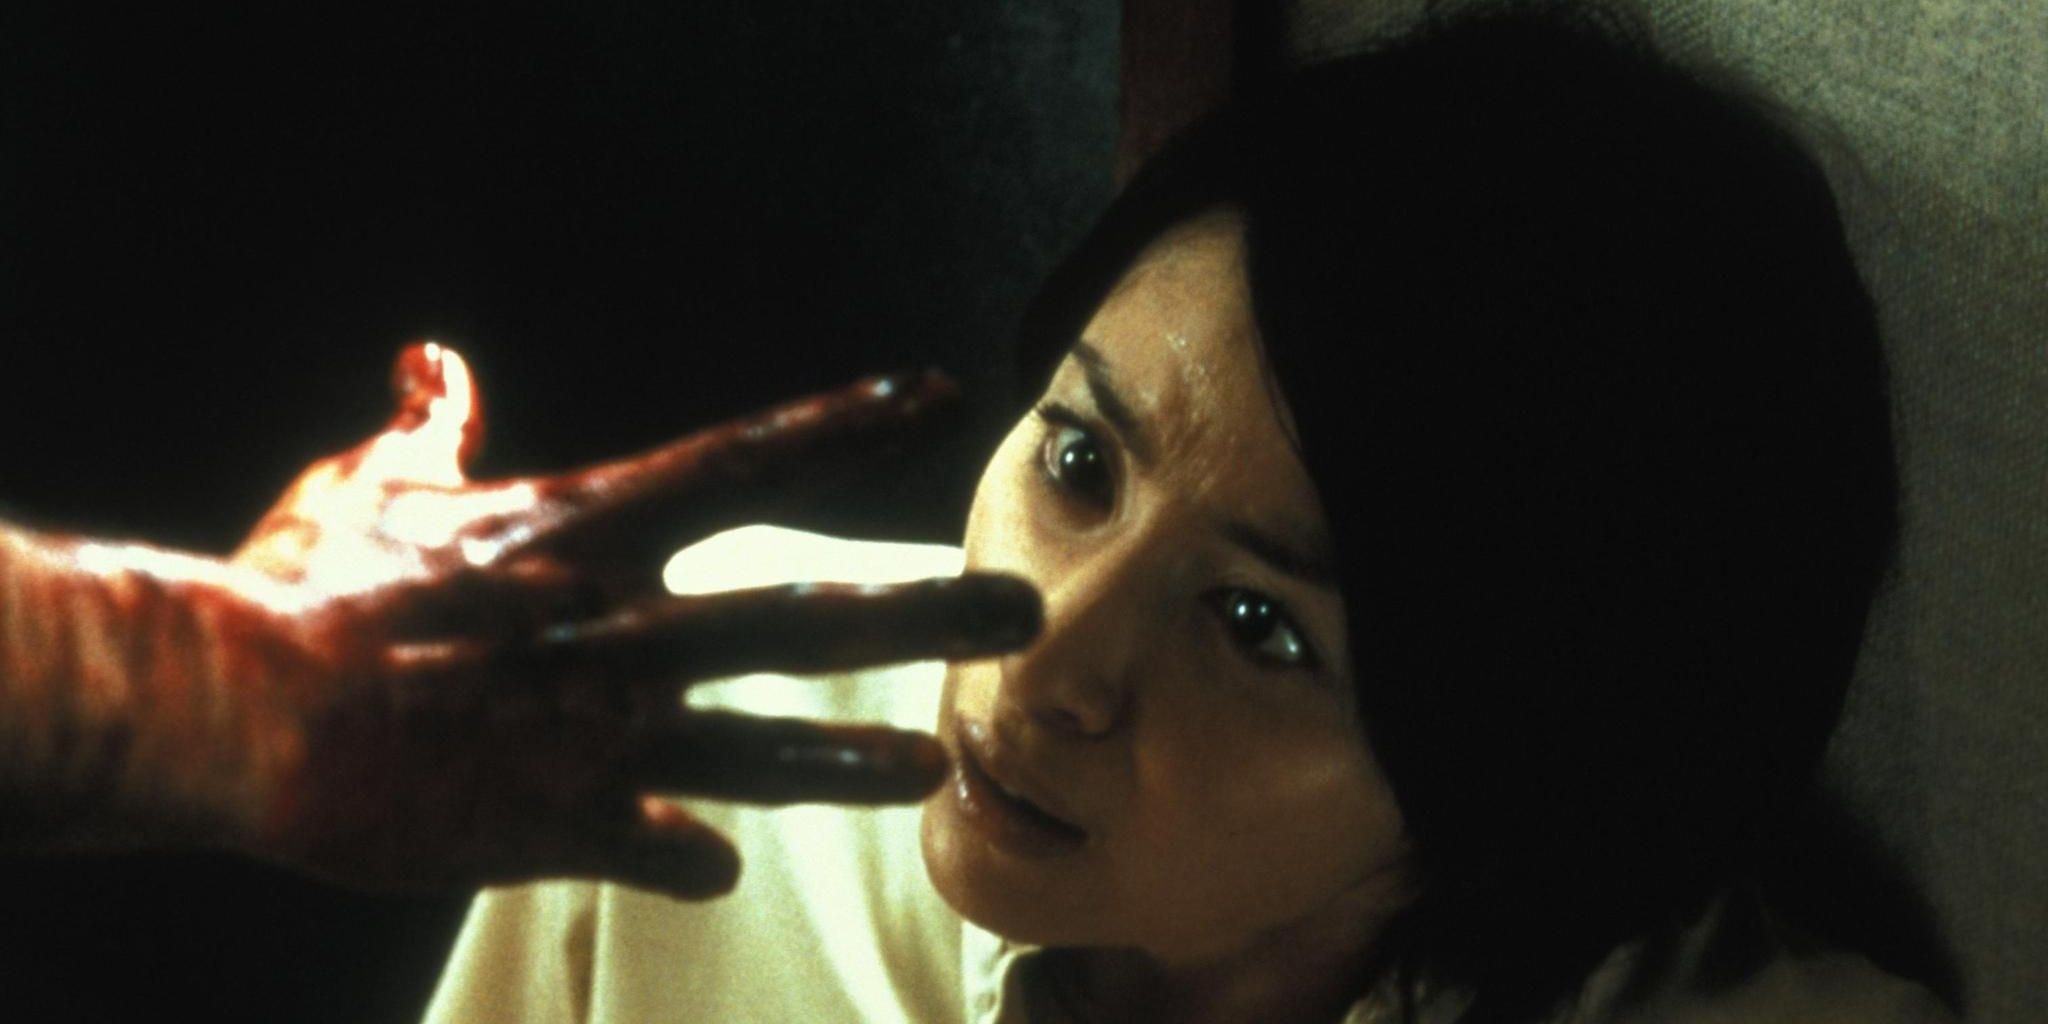 5 Ways The Grudge Is The Creepiest Horror Movie Of All Time (& 5 The Ring Is)